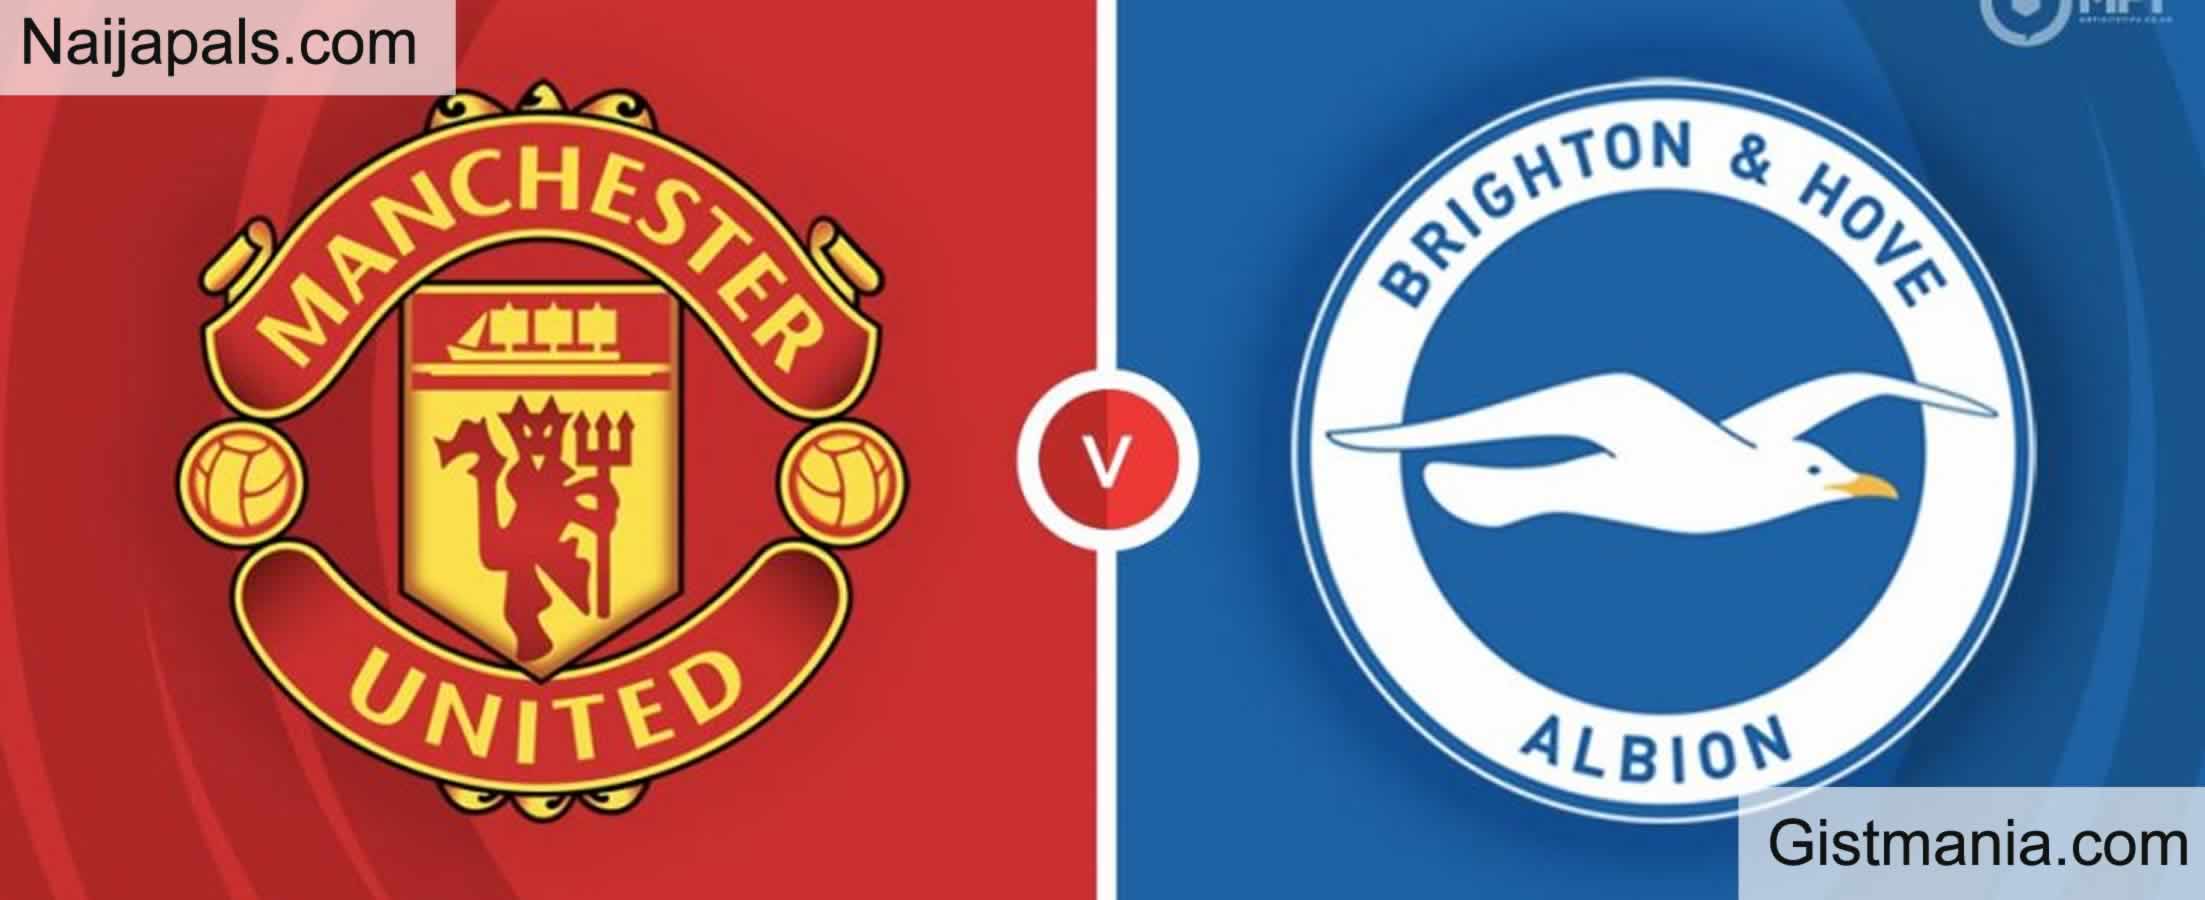 Manchester United v Brighton: English Premier League Match,Team News,Goal Scorers and Stats